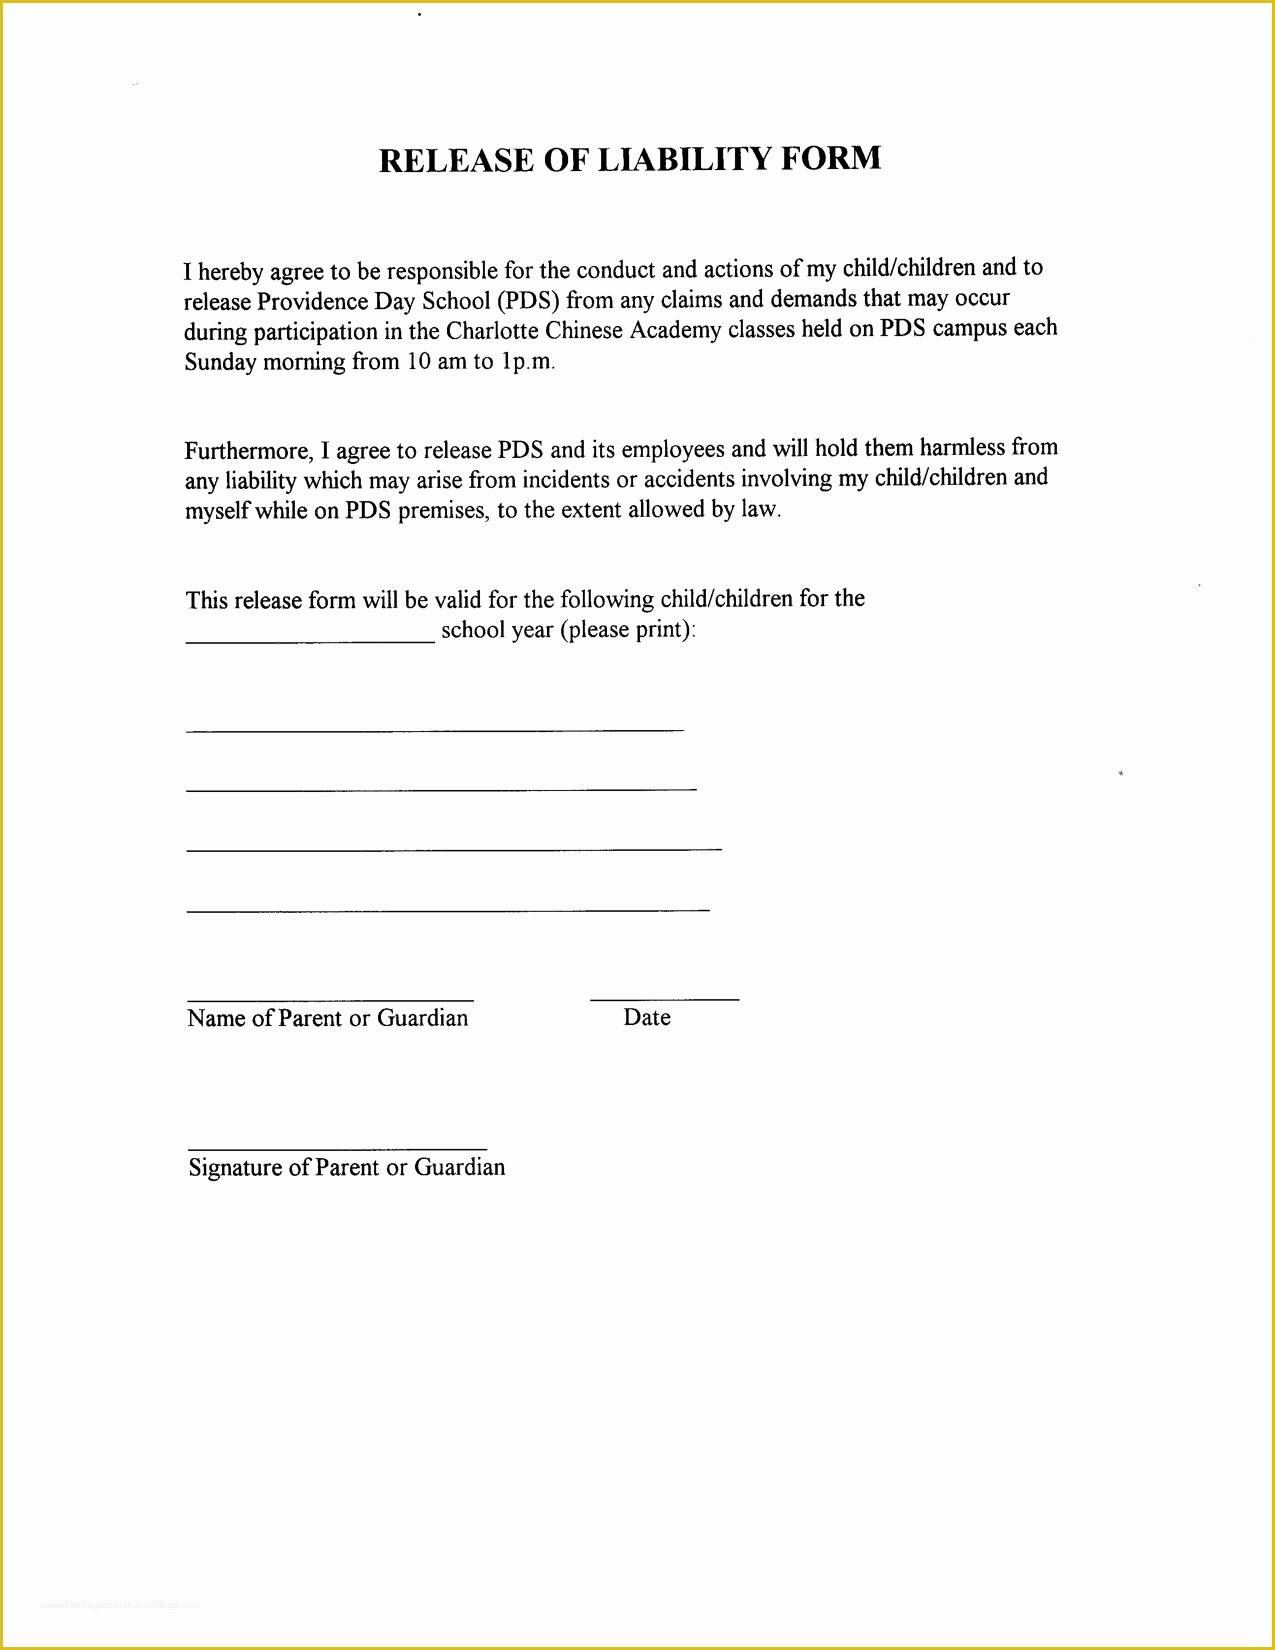 Free Liability Release form Template Of Liability Release form Template In Images Release Of